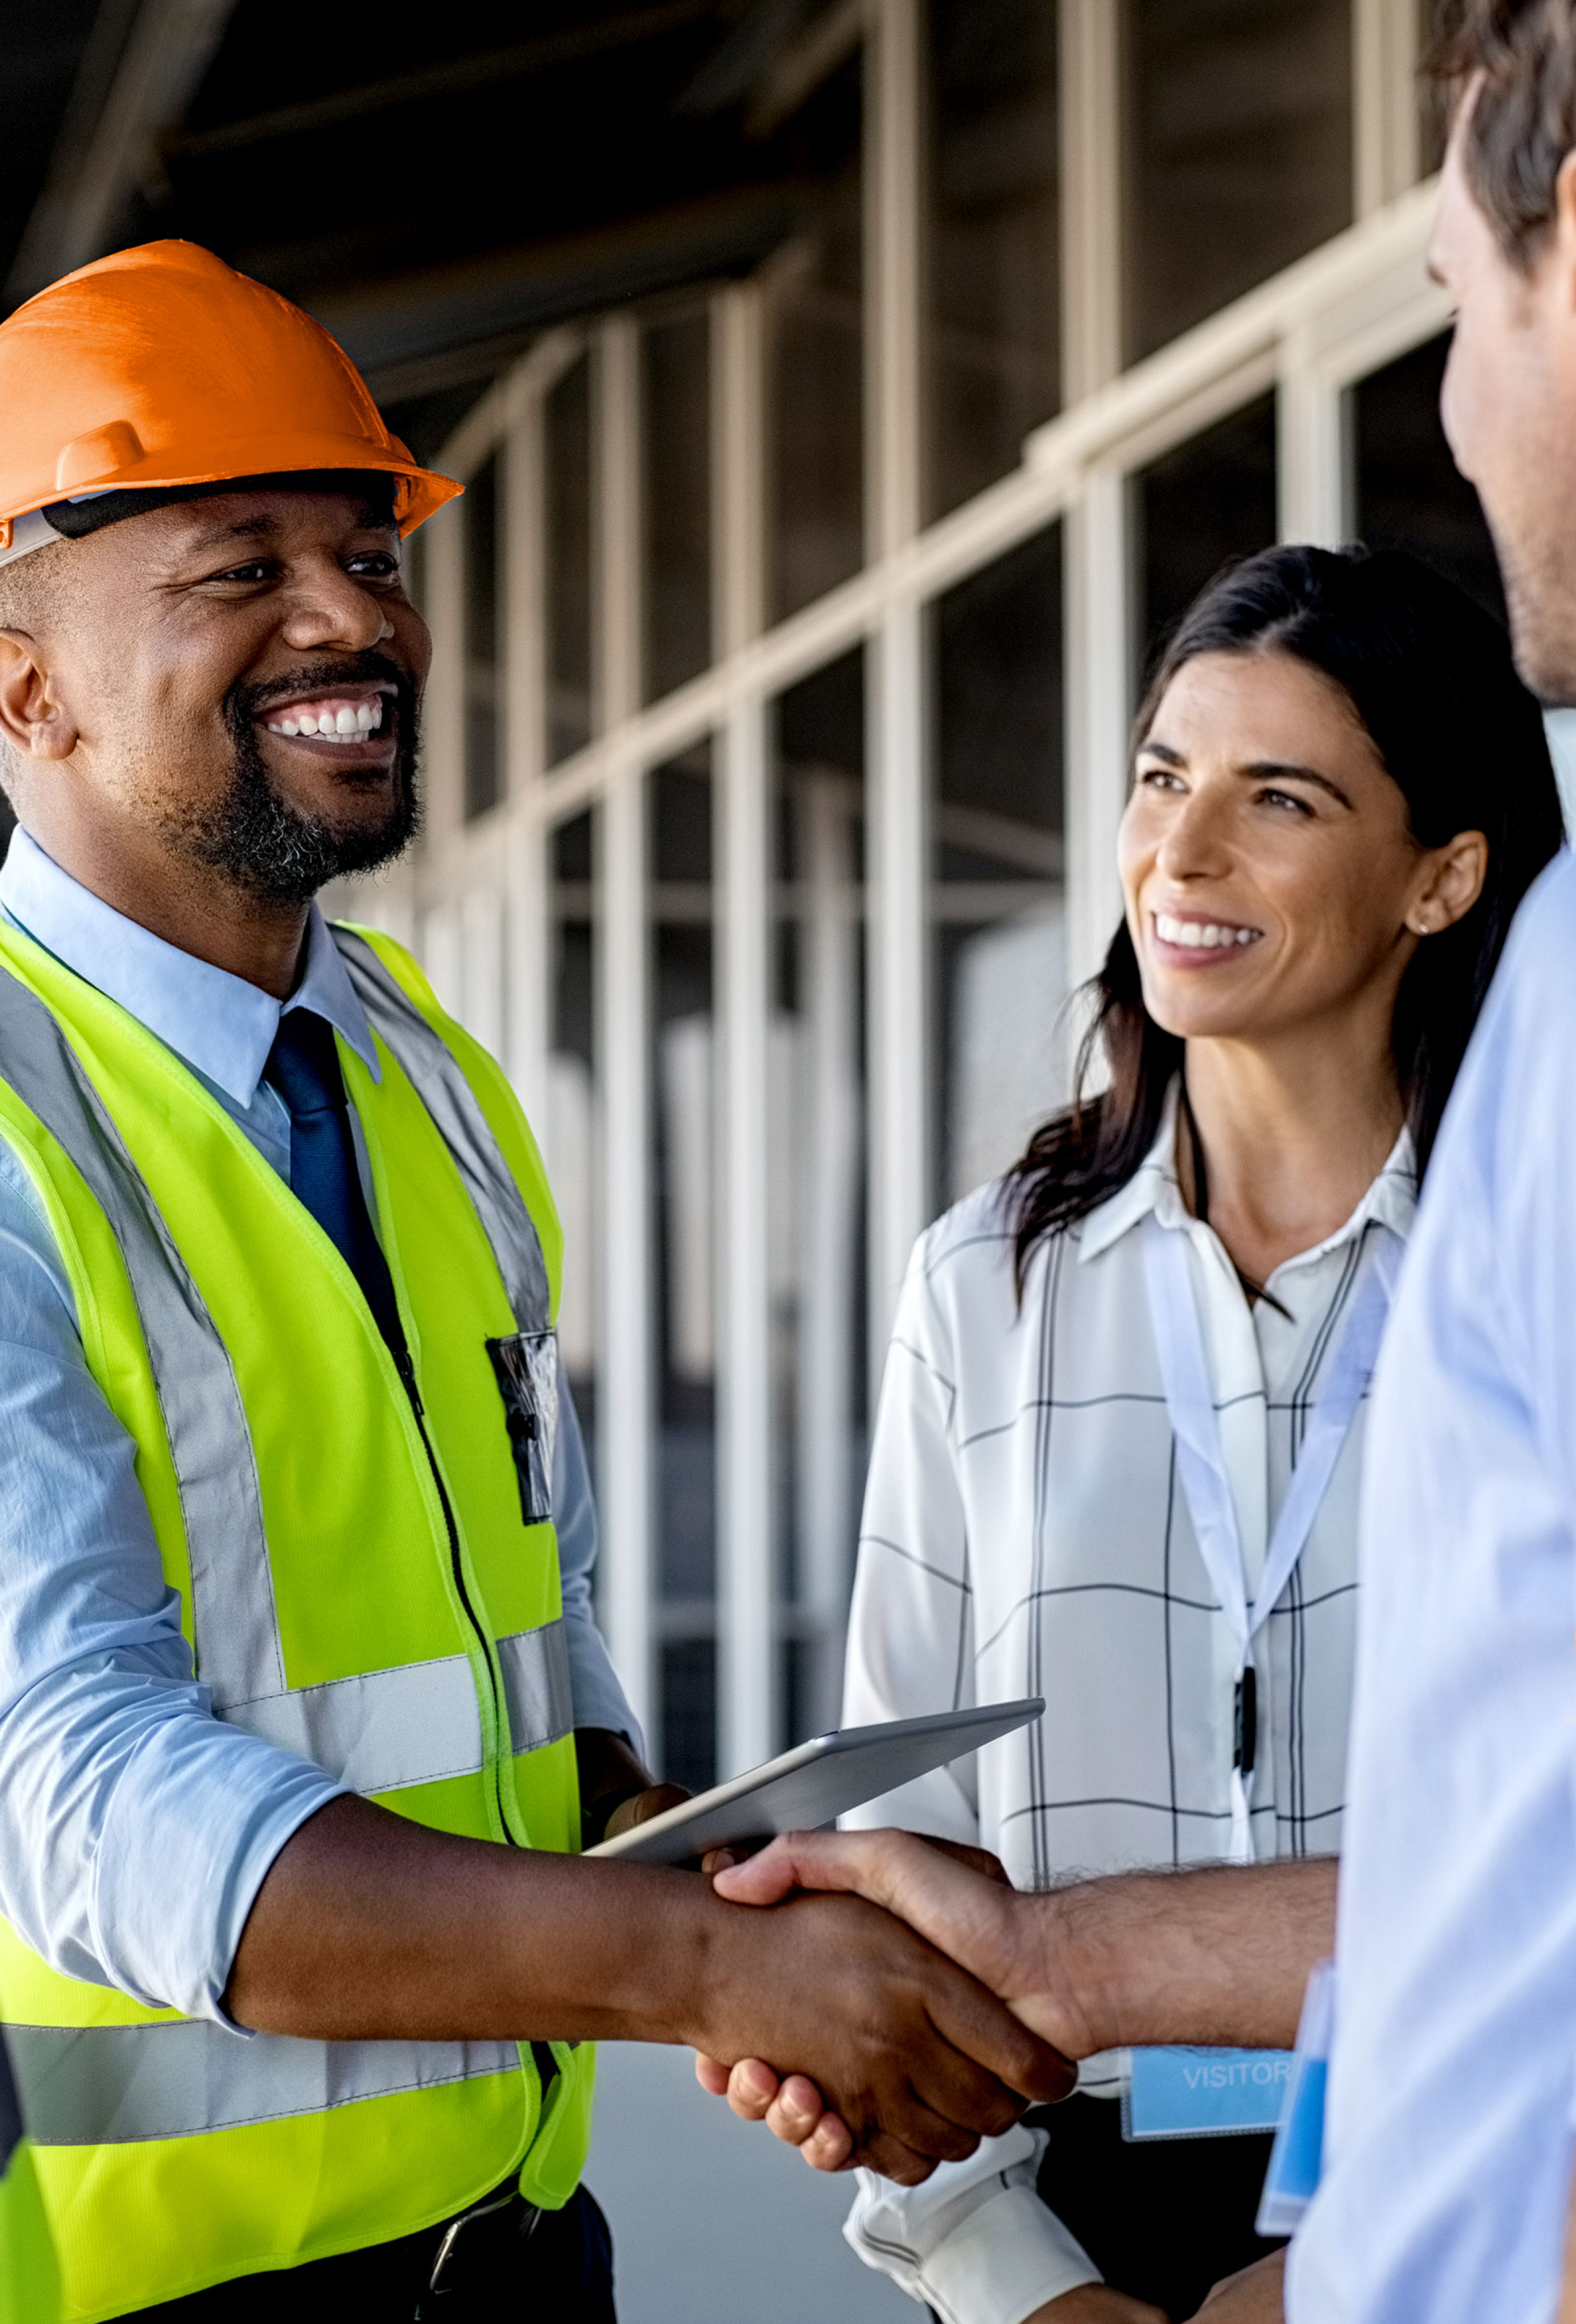 Picture of African man wearing an orange hard hat and yellow safety vest shaking hands with a Caucasian business man wearing a blue collared dress shirt, surrounded by a Caucasian woman smiling and wearing a white blouse and a Caucasian man wearing a dark blue dress shirt and yellow safety vest